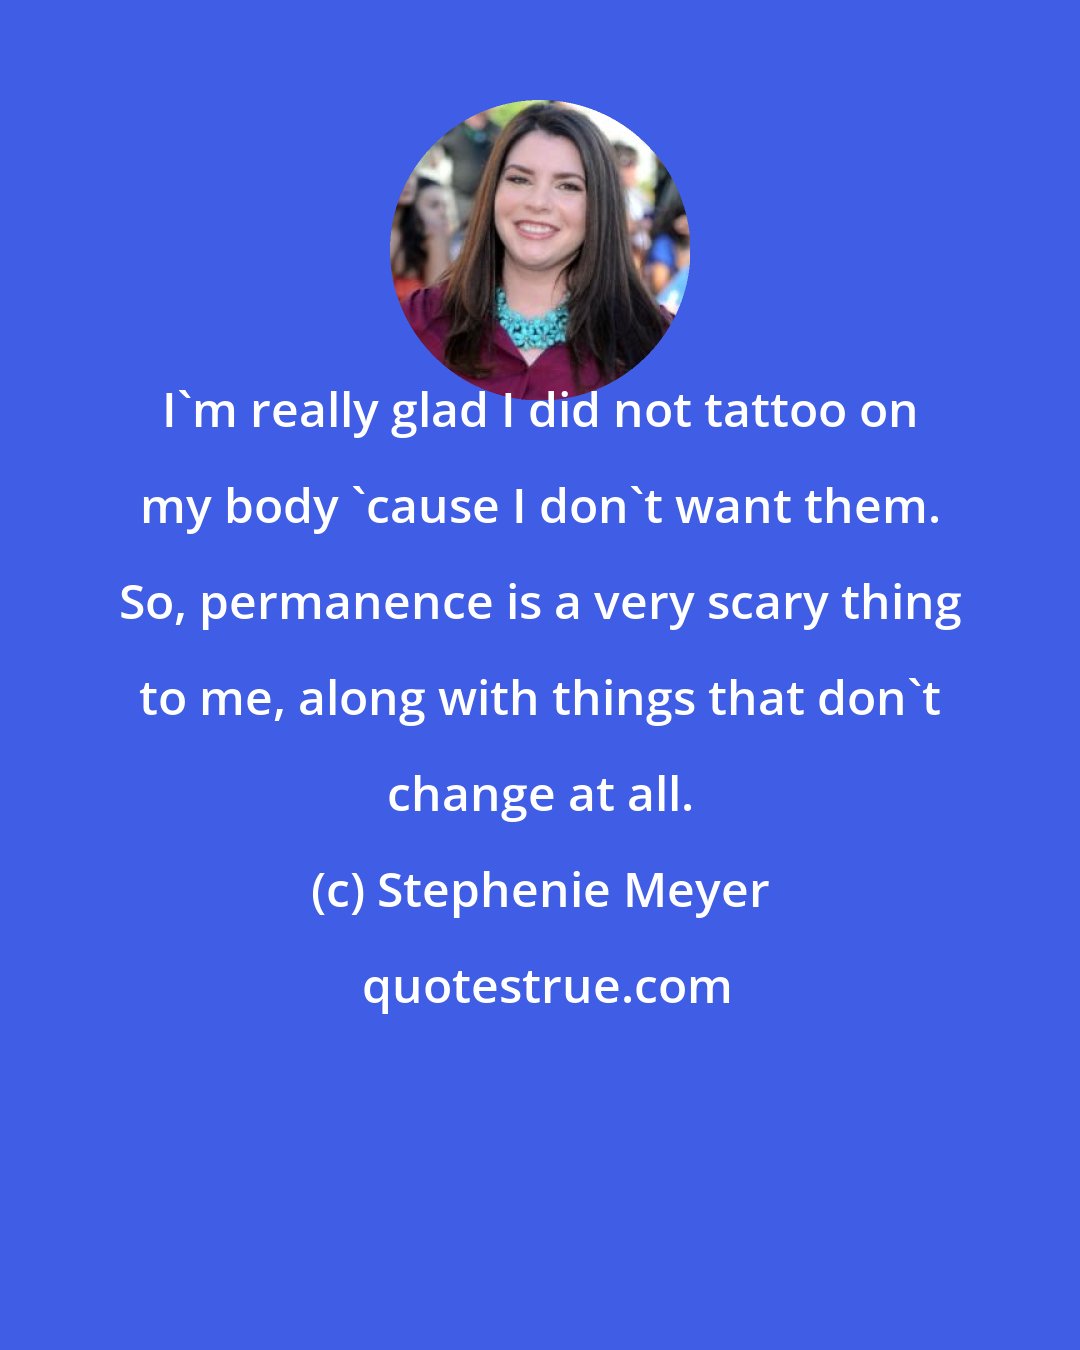 Stephenie Meyer: I'm really glad I did not tattoo on my body 'cause I don't want them. So, permanence is a very scary thing to me, along with things that don't change at all.